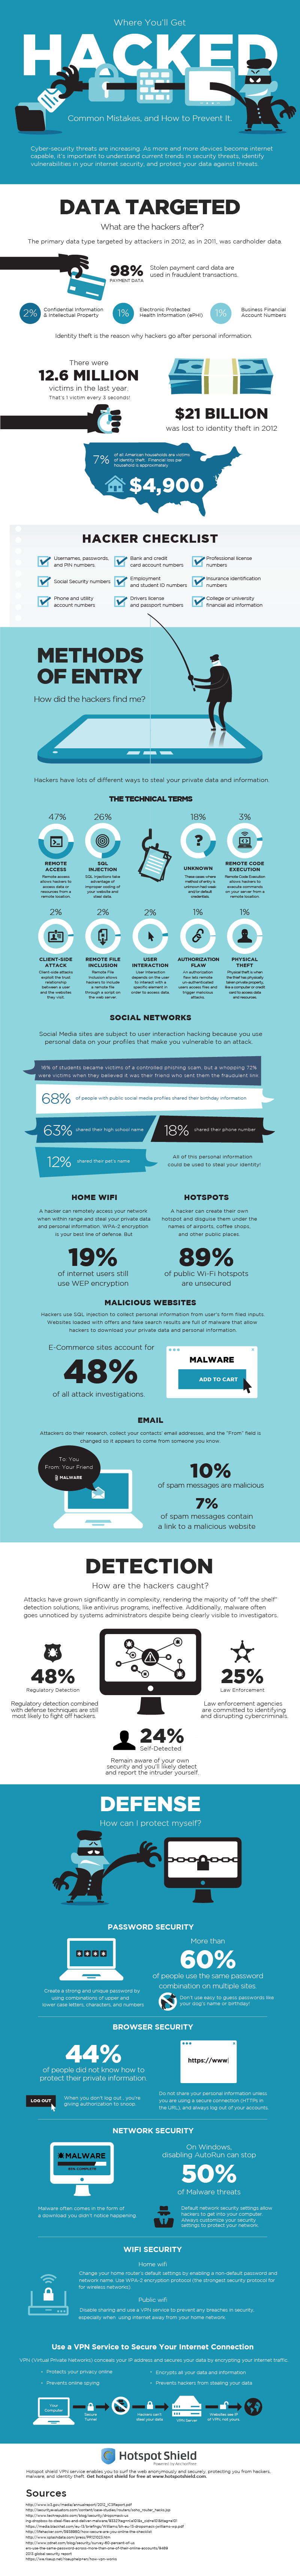 where-you-will-get-hacked-infographic8001